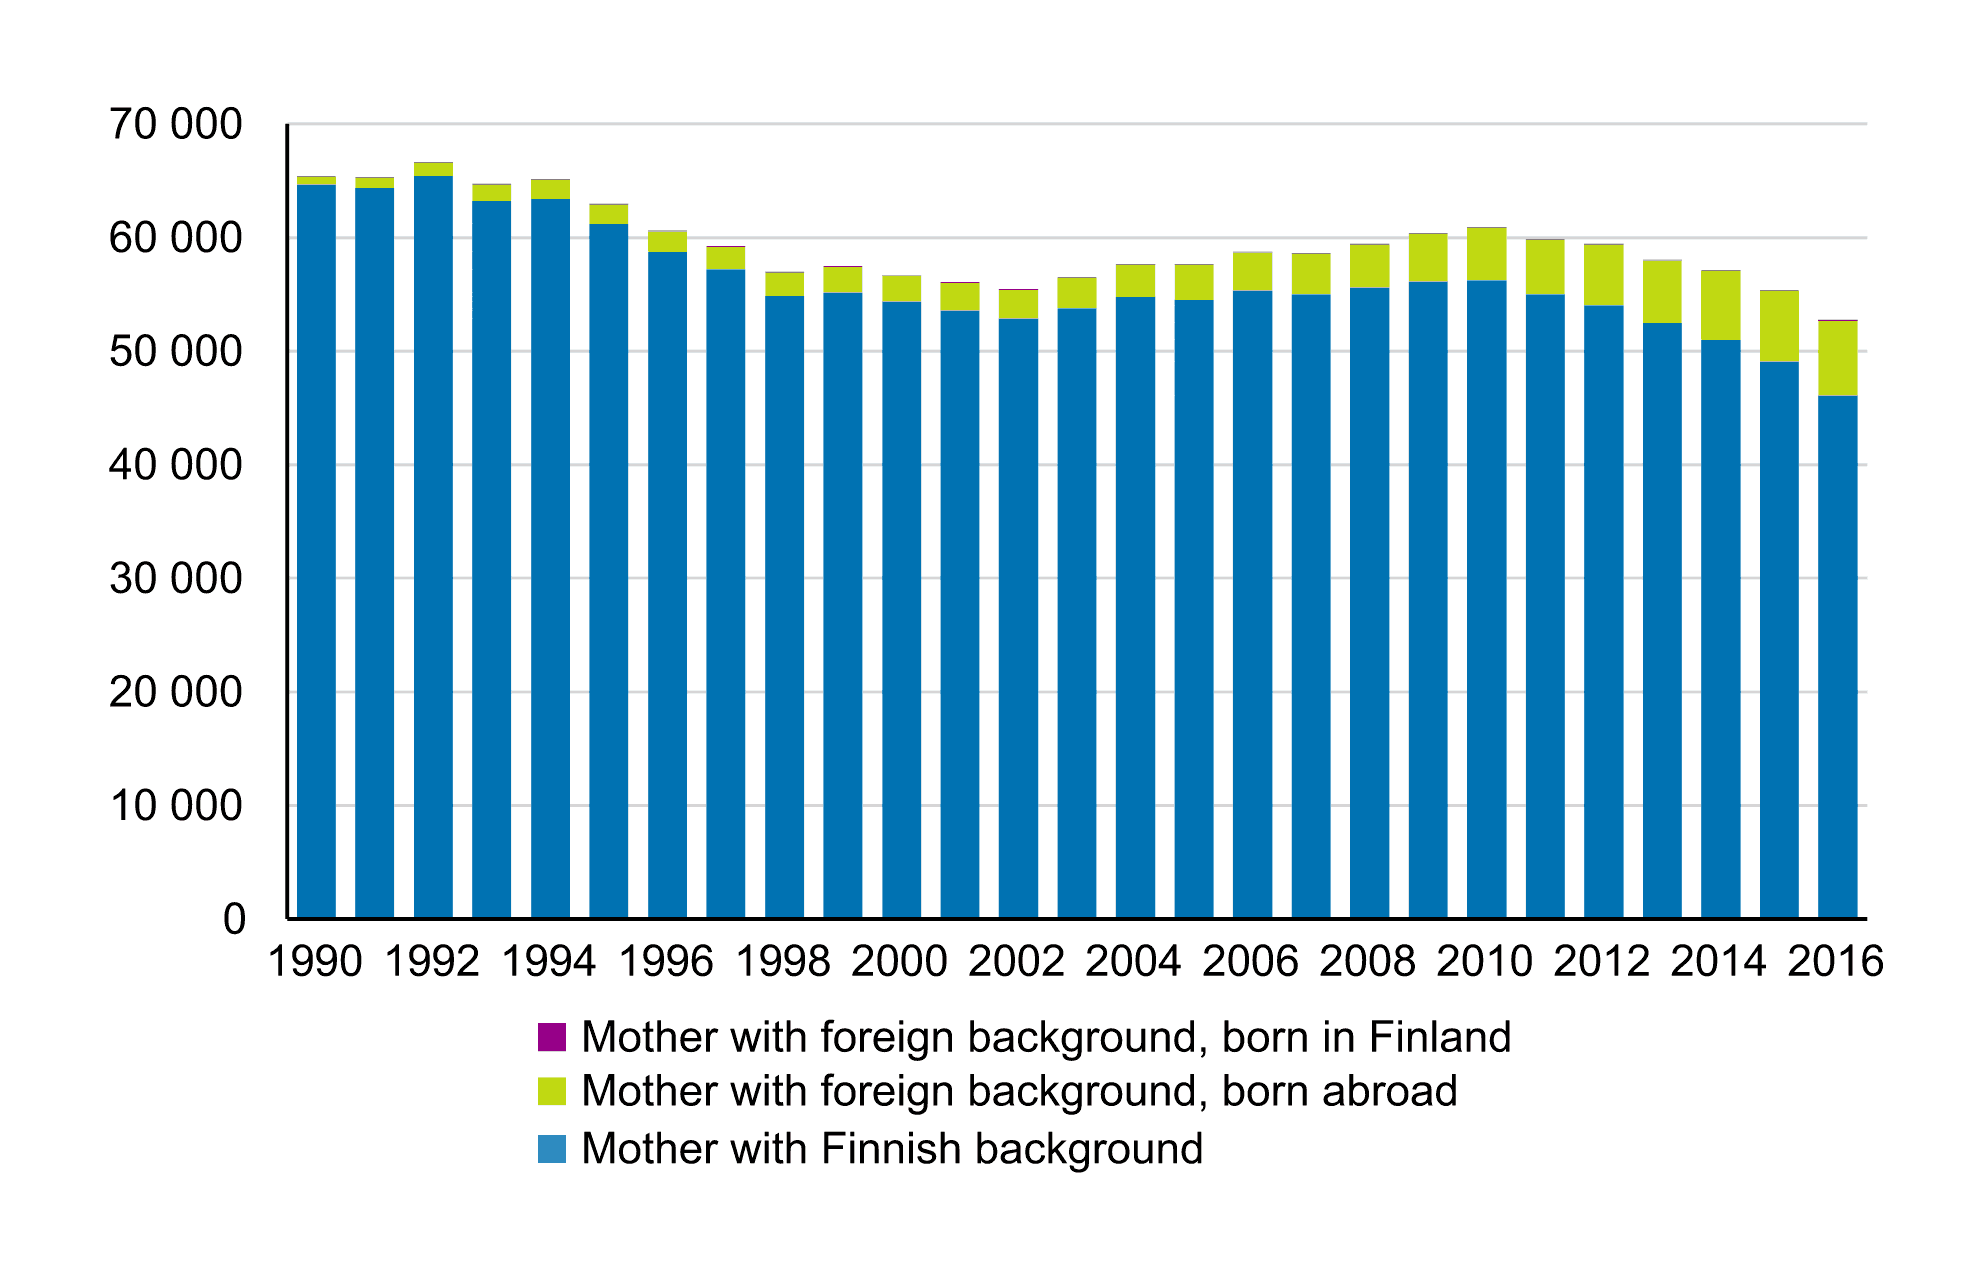 Number of childbirths in Finland from 1990 to 2016